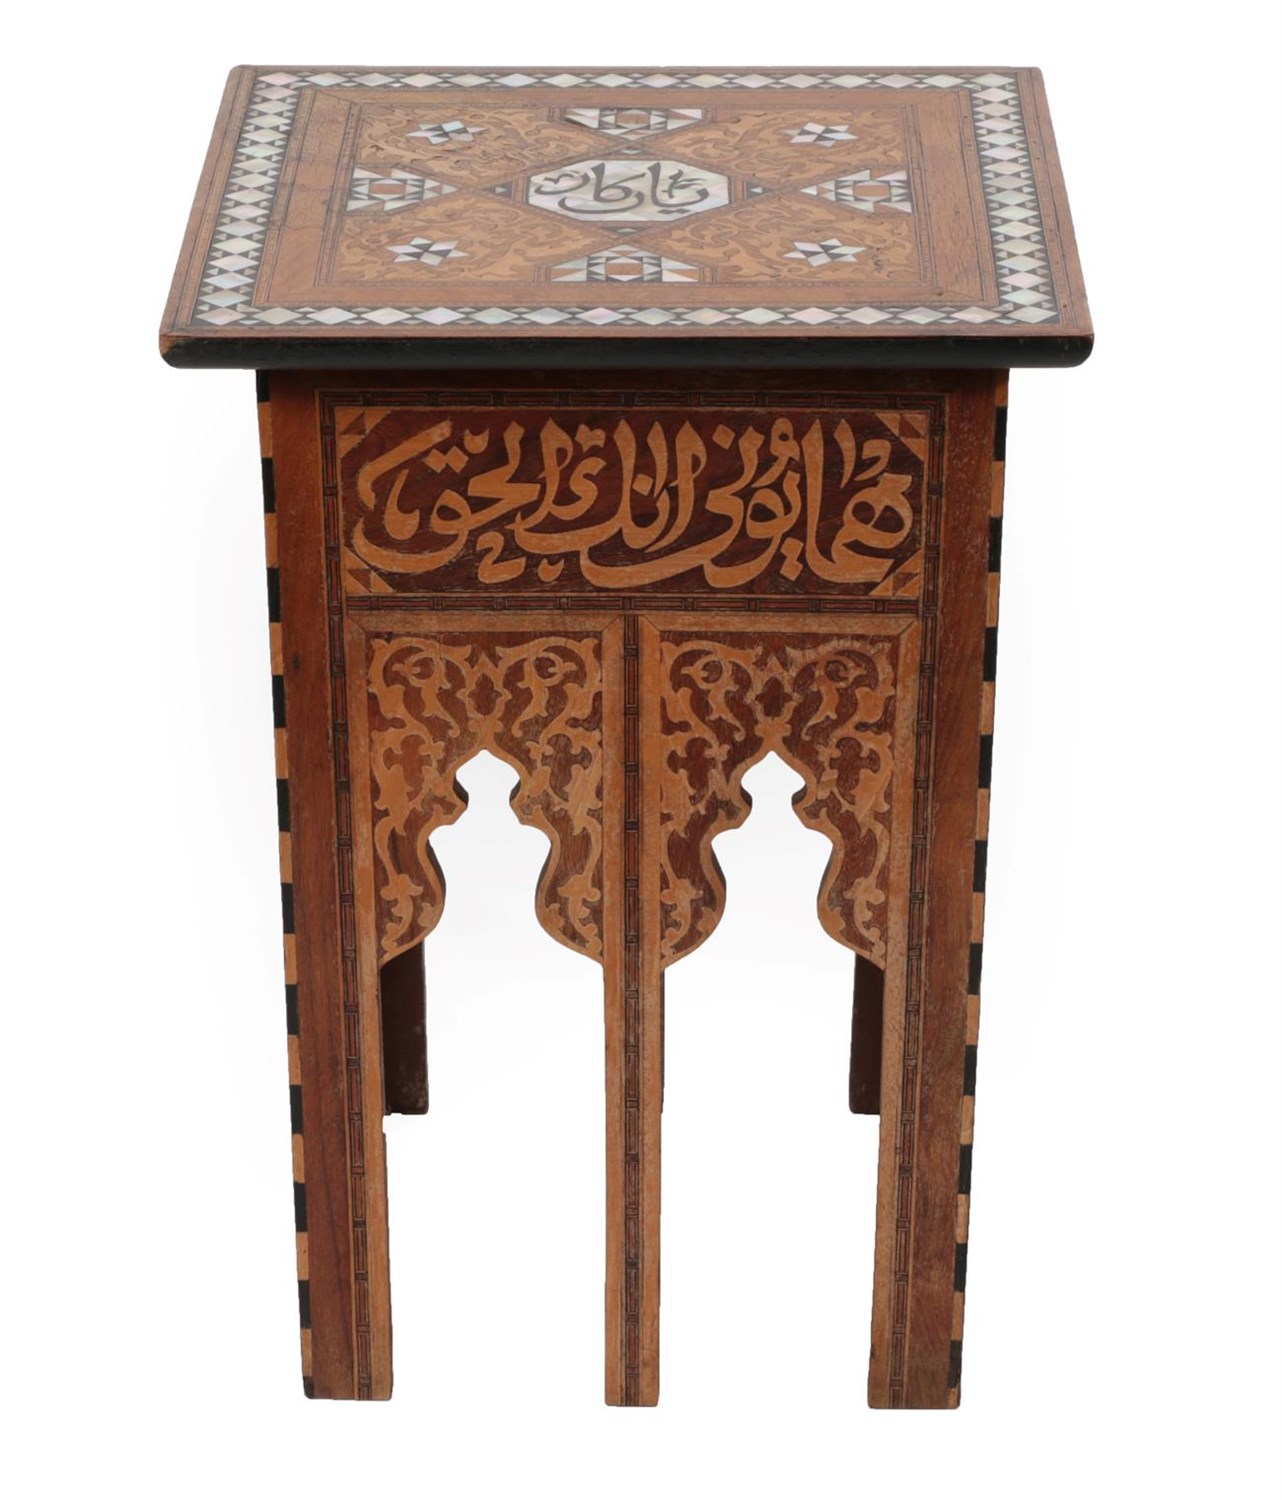 Lot 268 - A Damascus Mother-of-Pearl Inlaid and Marquetry Occasional Table, late 19th/early 20th century, the